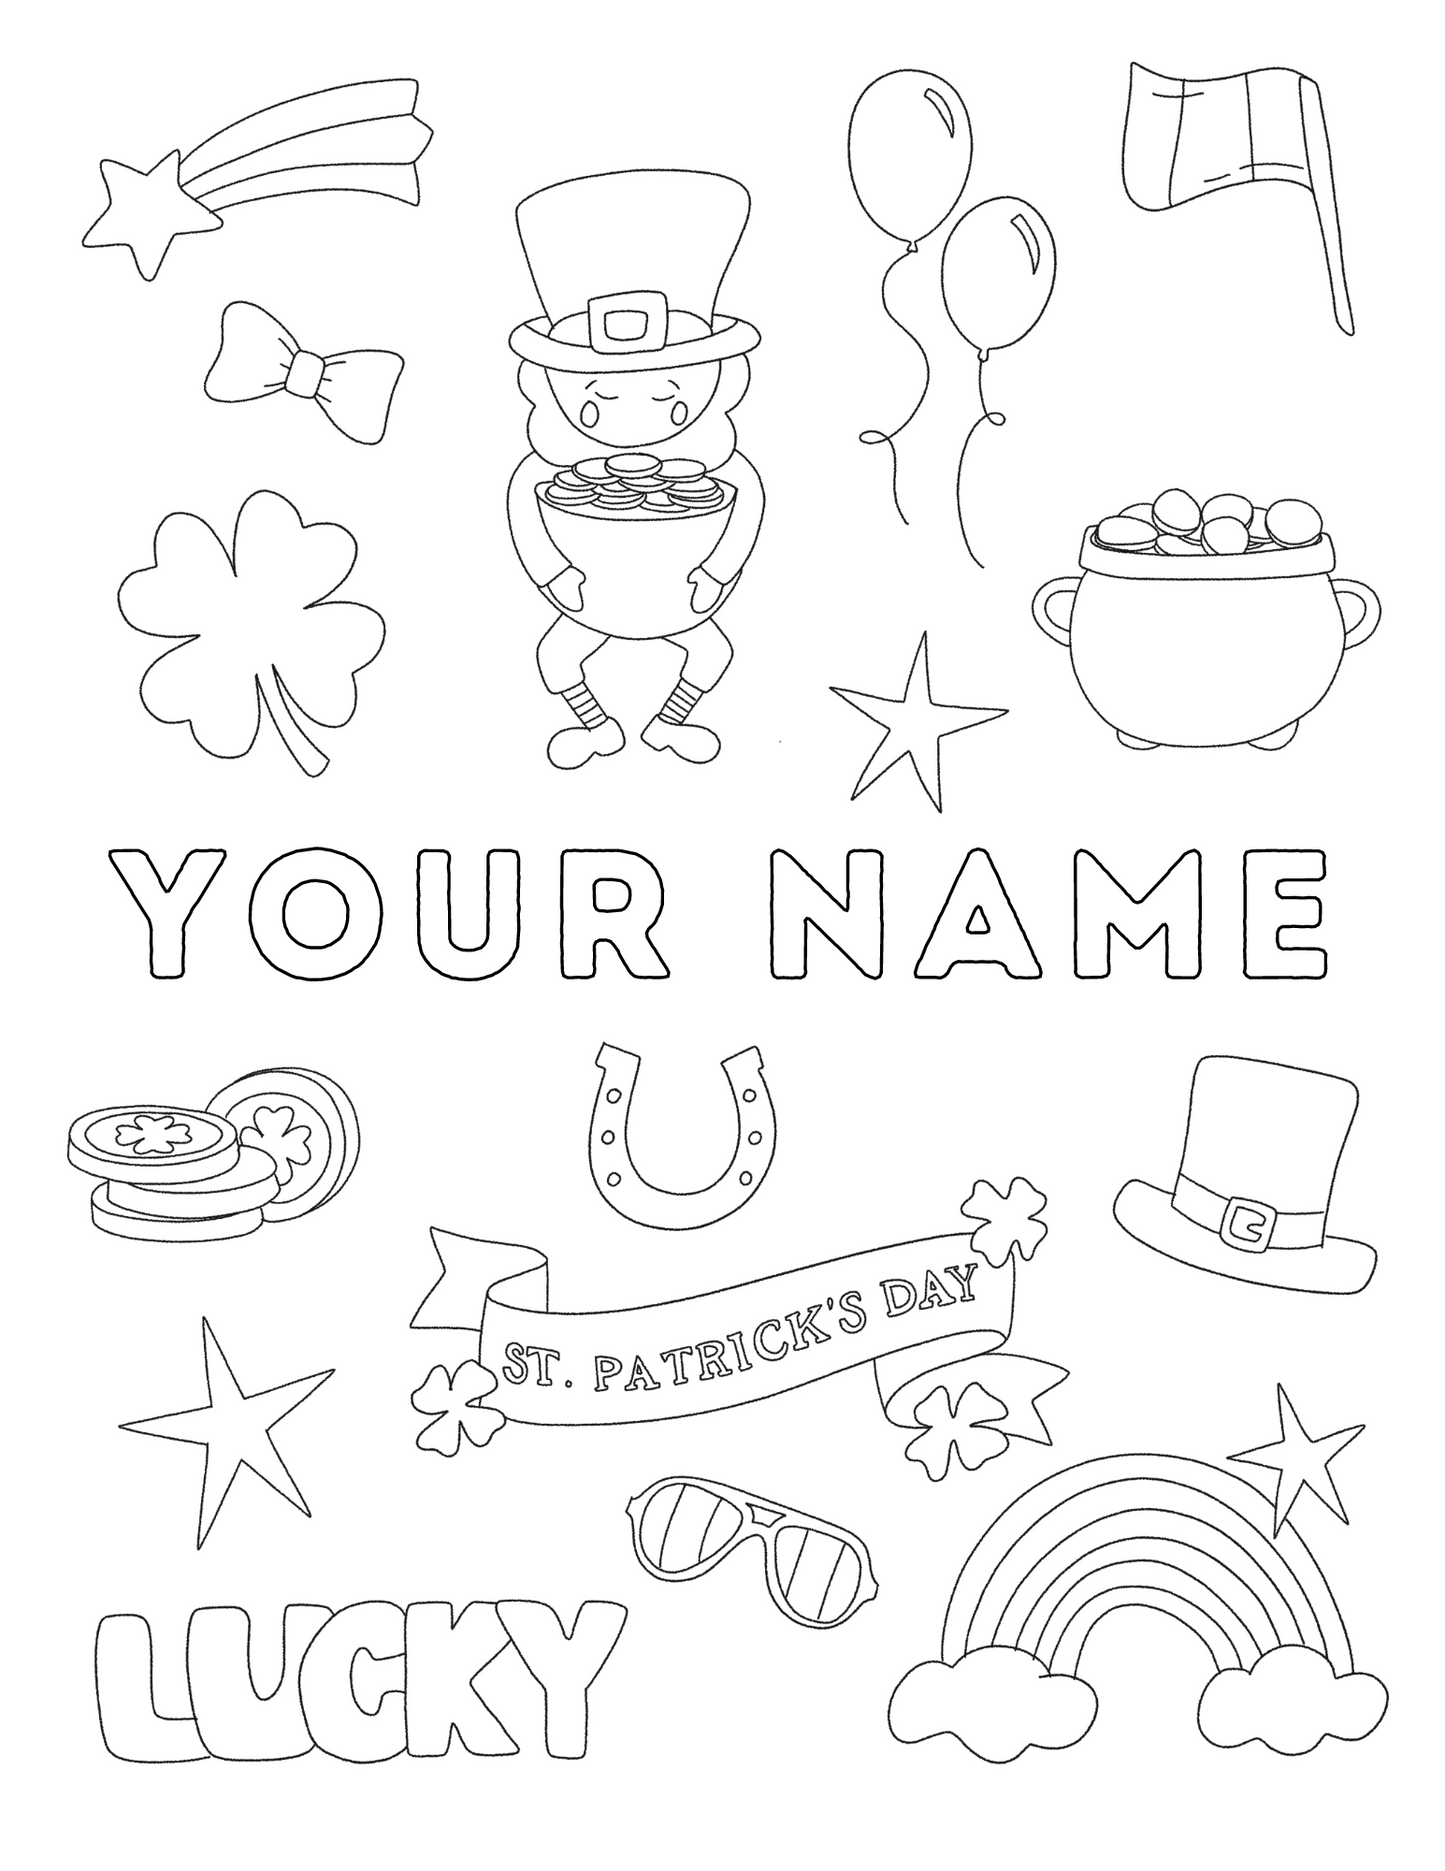 Custom ST. PATRICK'S DAY Name Coloring Page